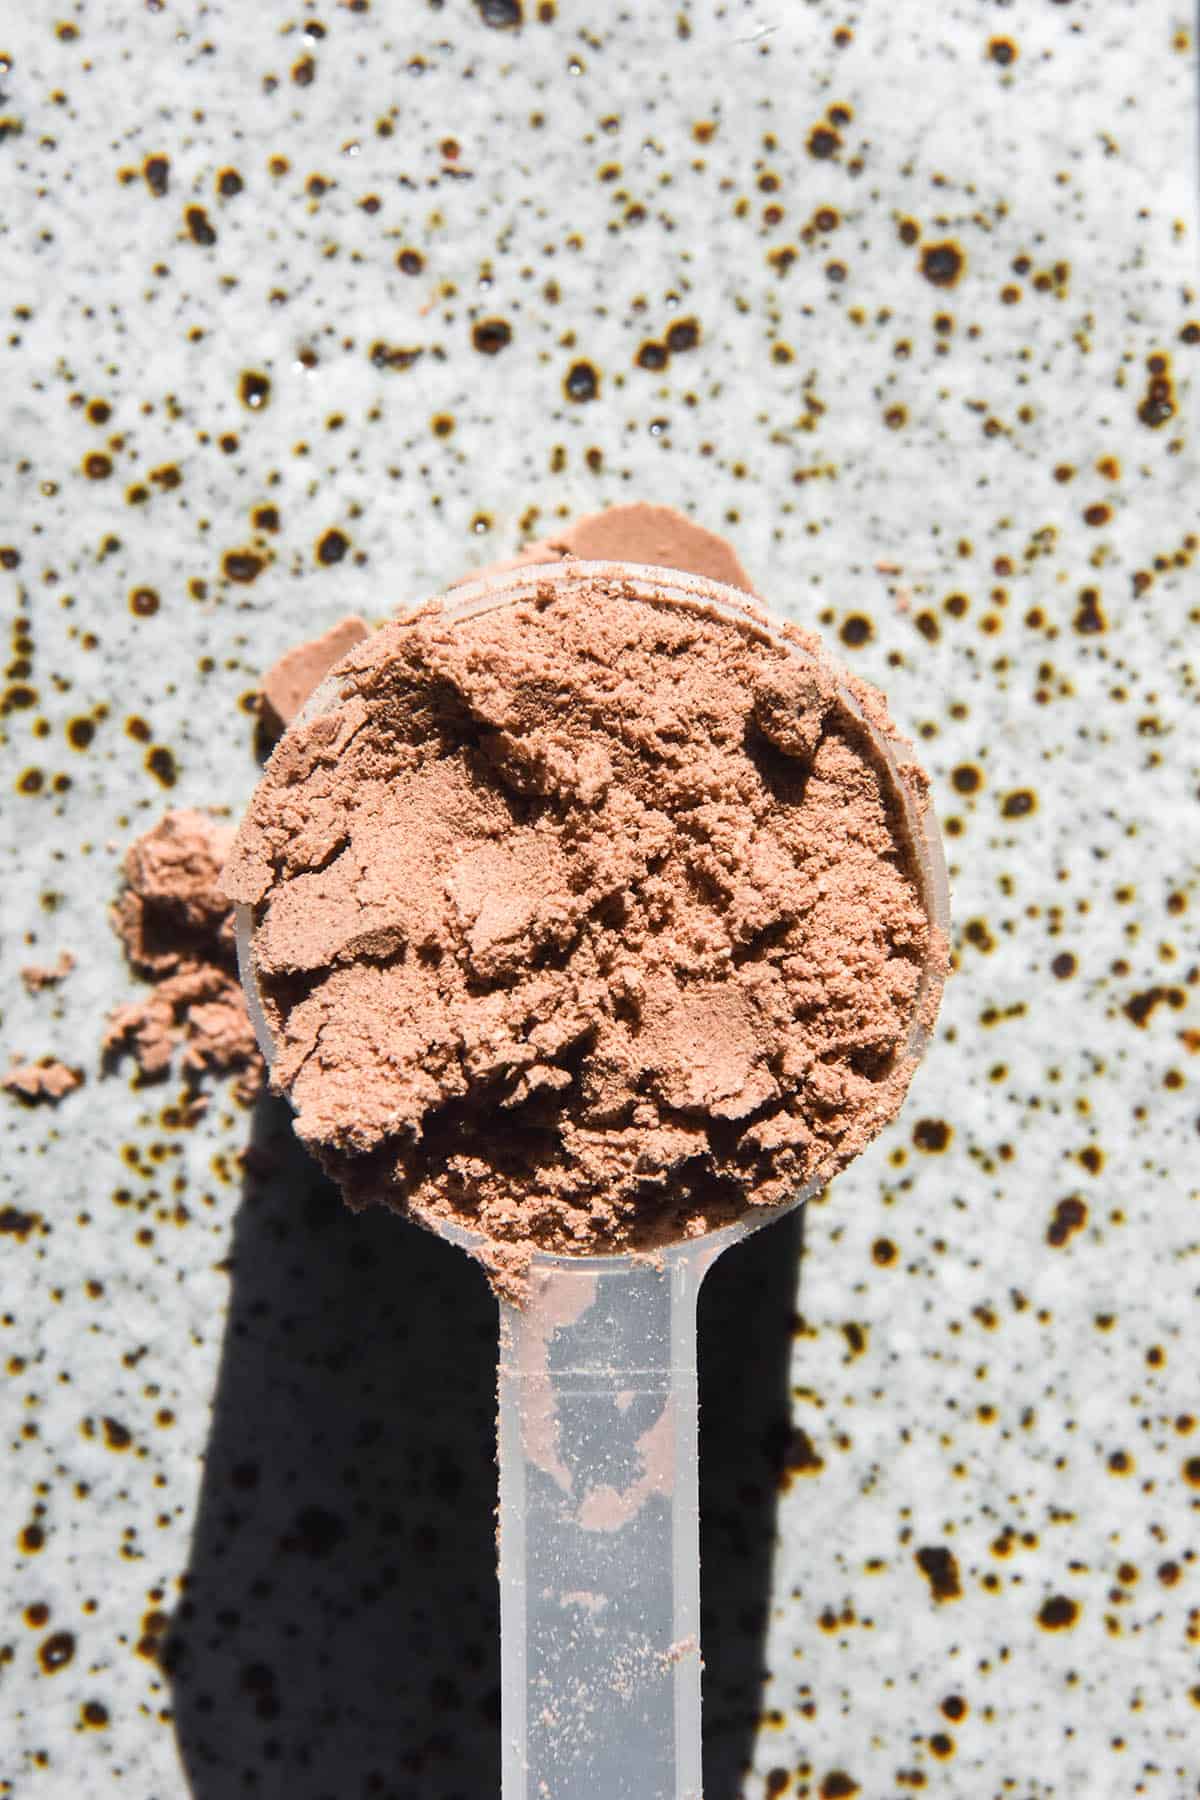 A close up aerial image of a scoop of elemental diet chocolate powder on a white speckled ceramic plate